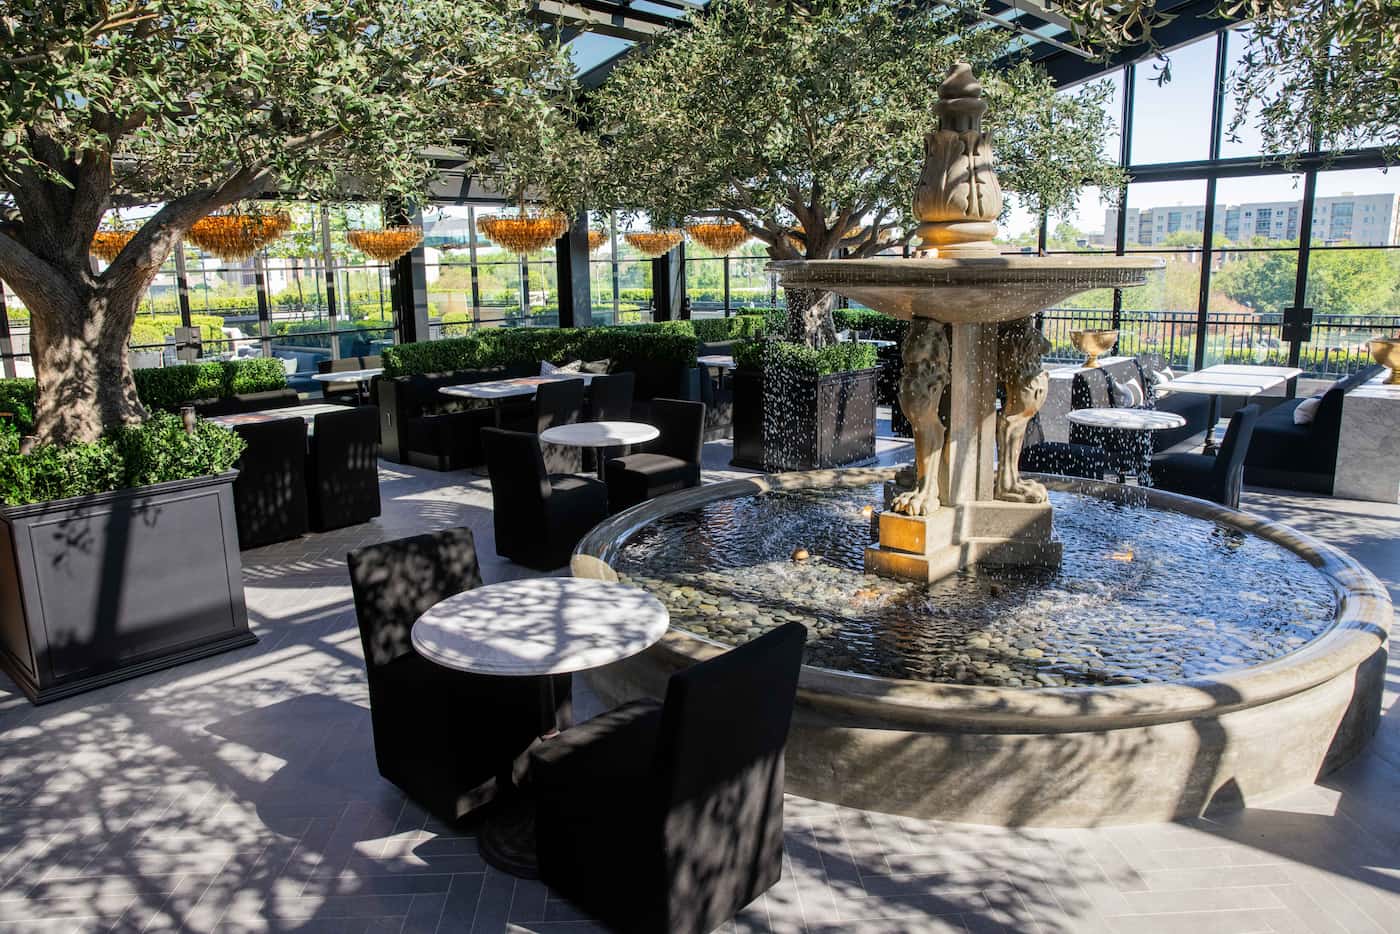 The dining area of the RH restaurant has fountains and French doors.